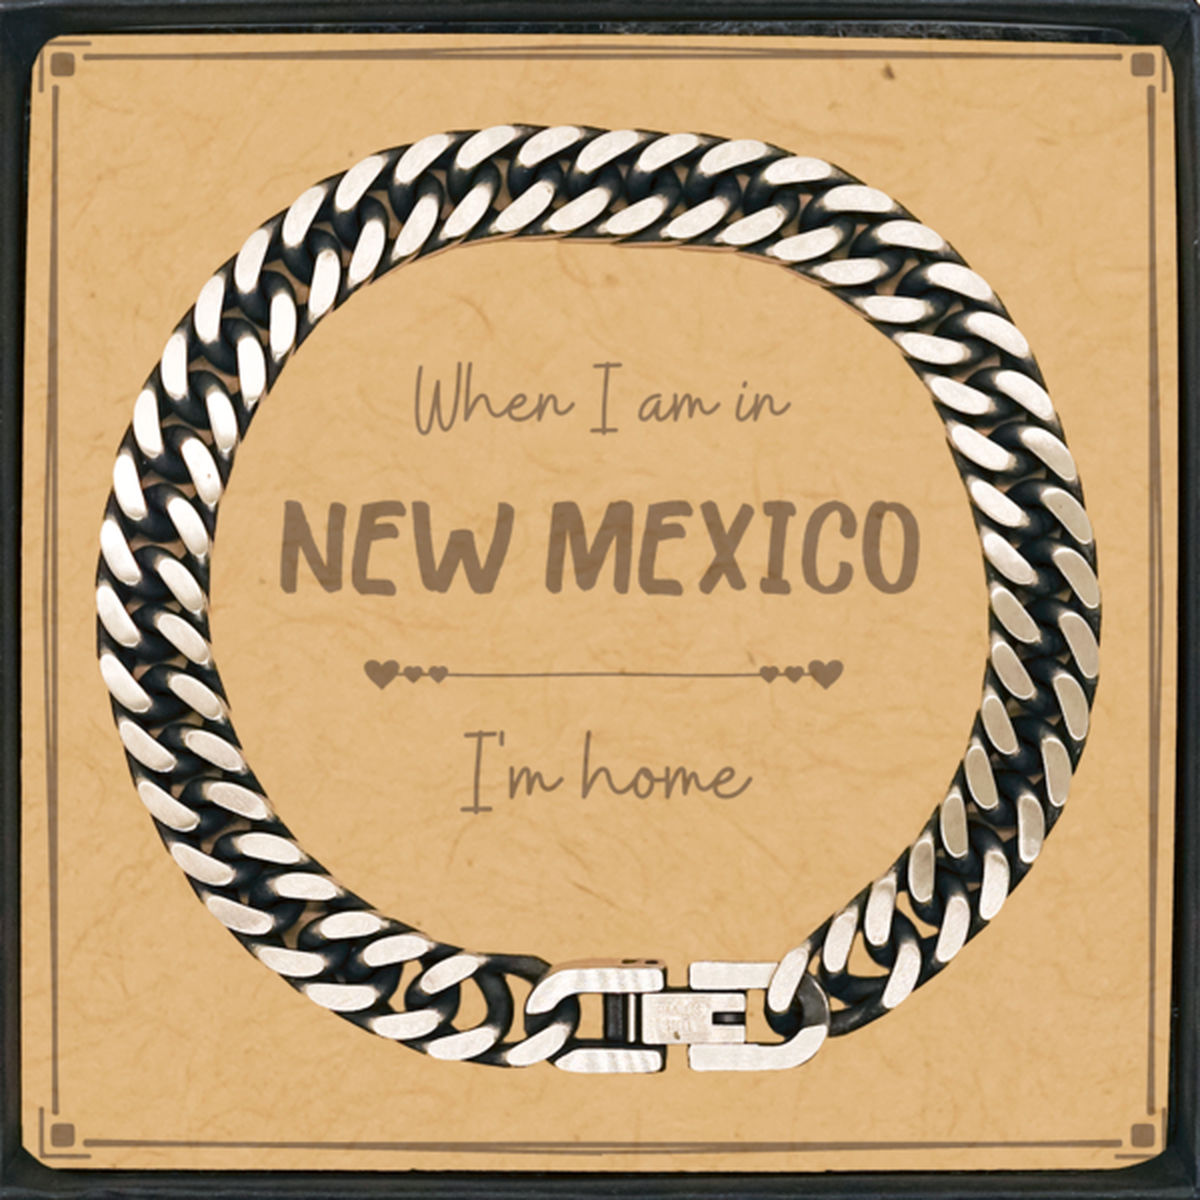 When I am in New Mexico I'm home Cuban Link Chain Bracelet, Message Card Gifts For New Mexico, State New Mexico Birthday Gifts for Friends Coworker